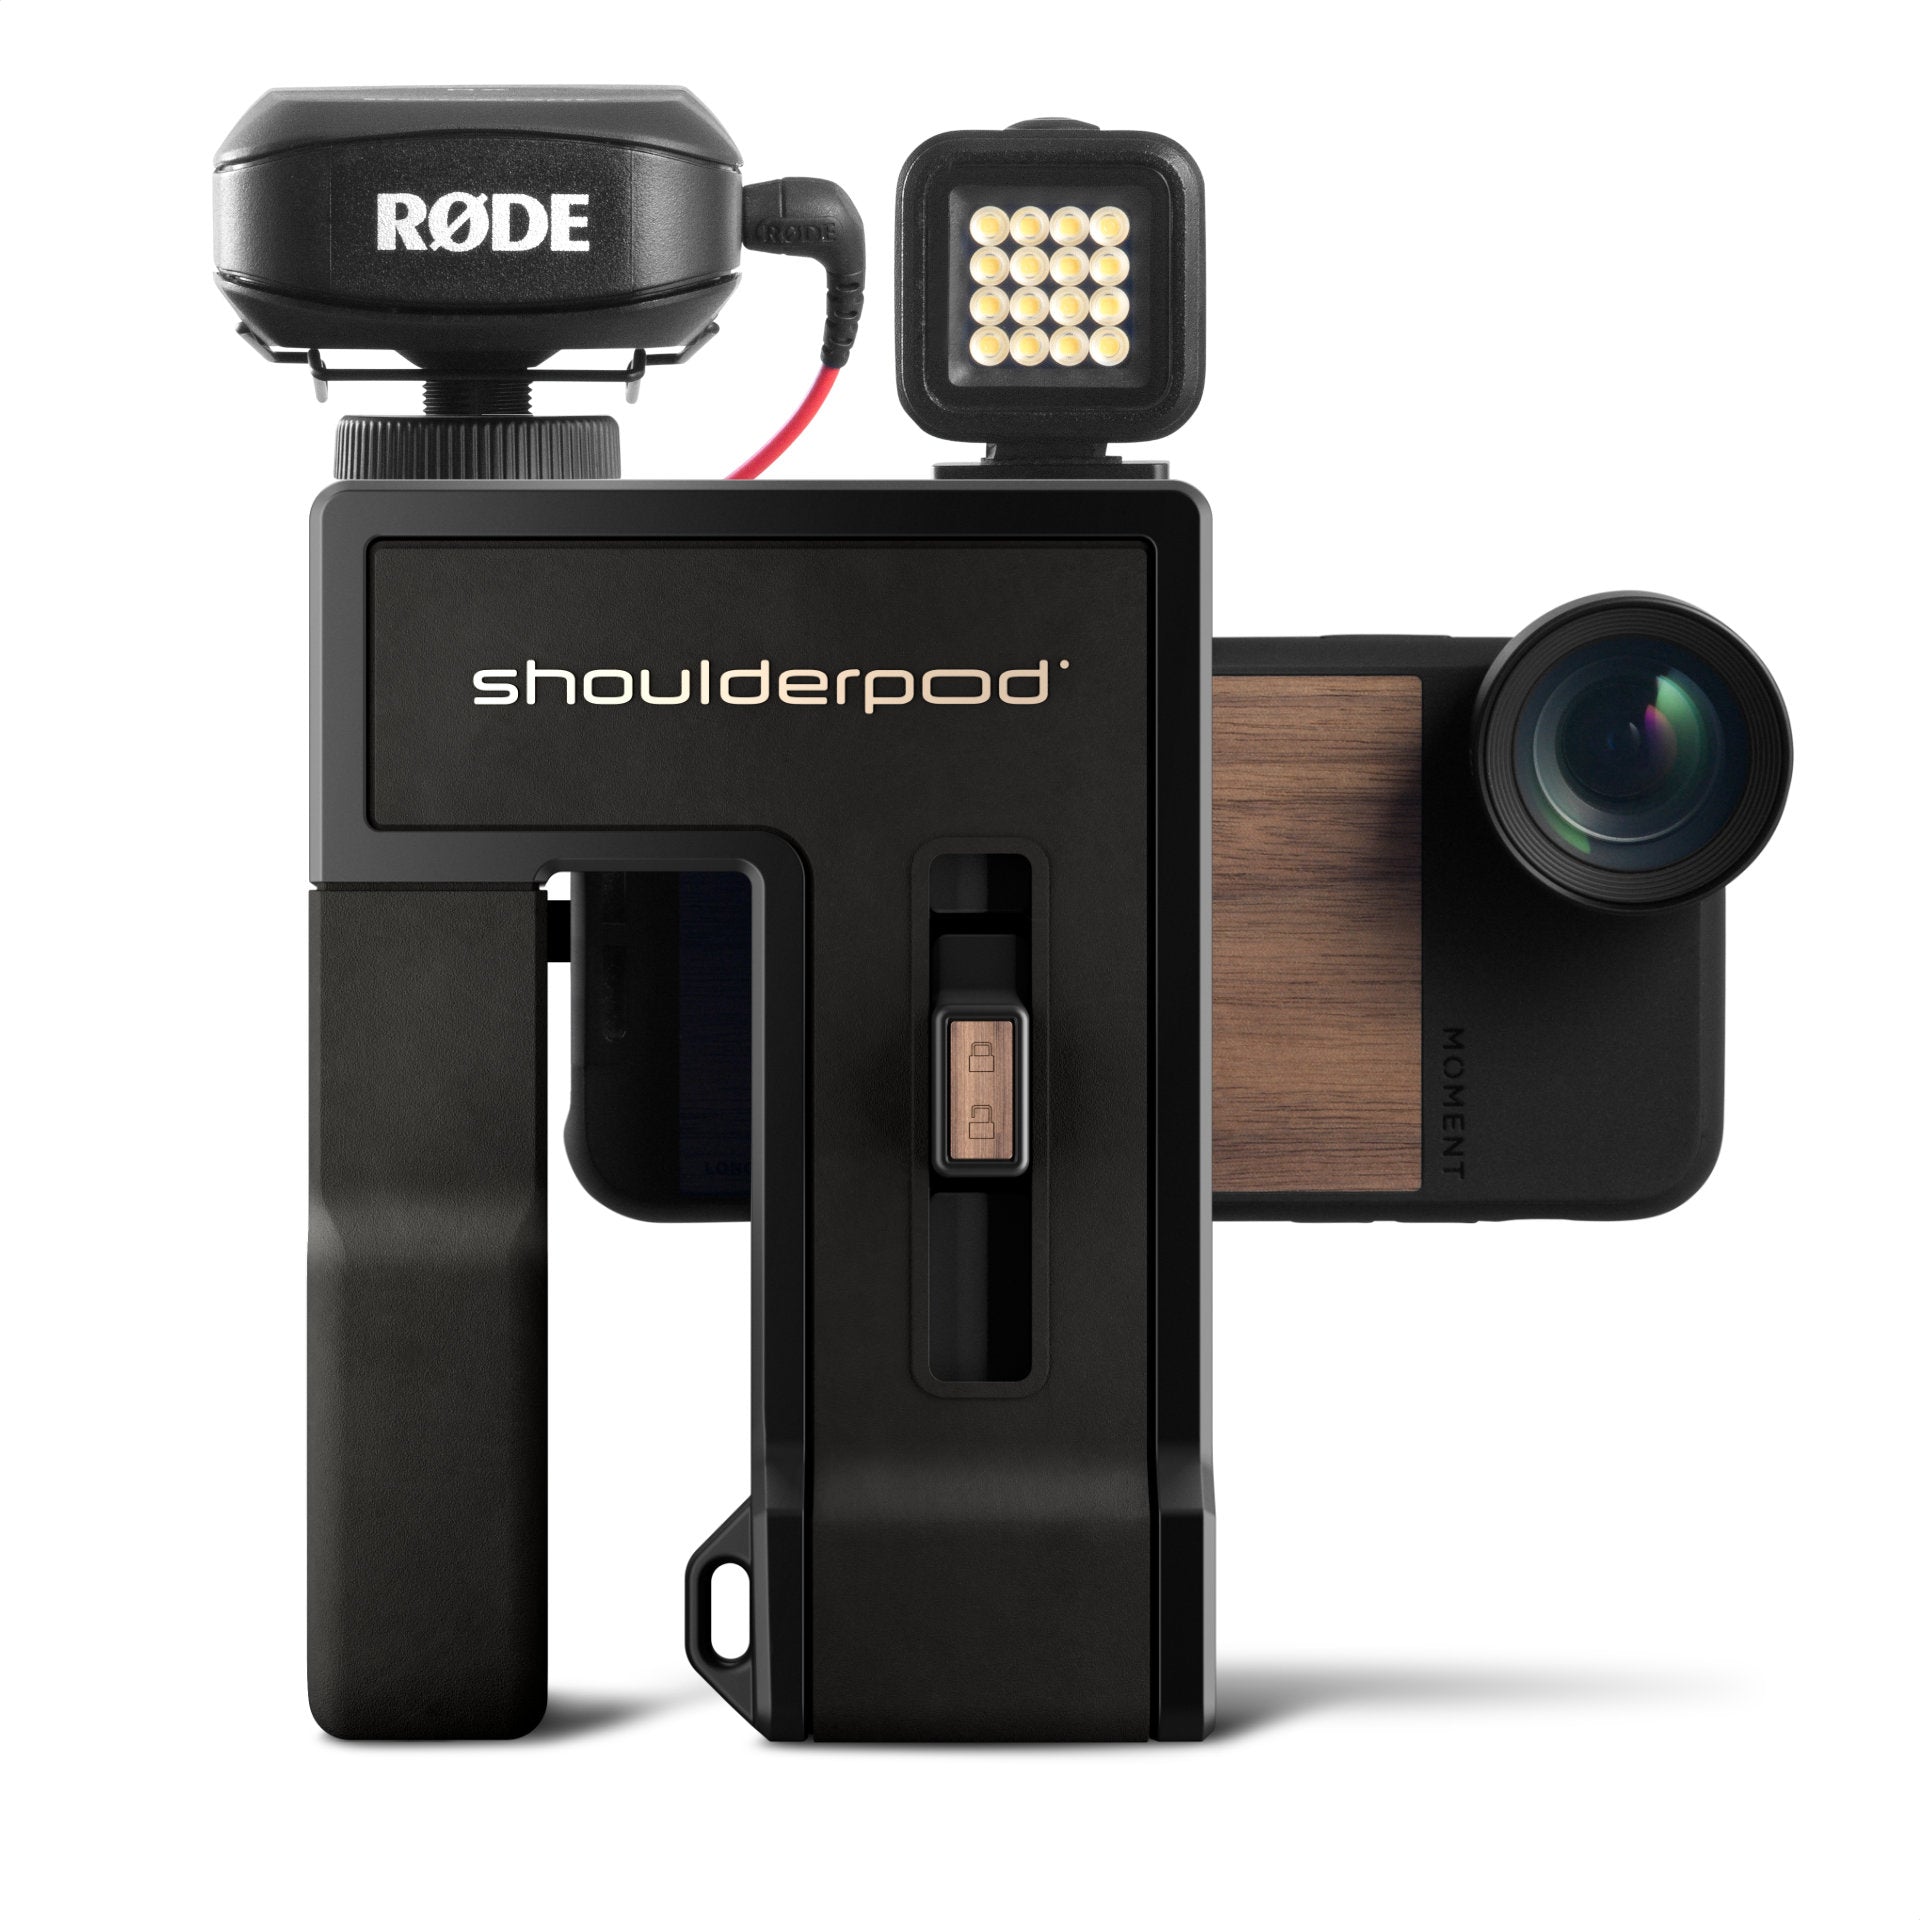 Shoulderpod G2 - The Bold One - The Usual